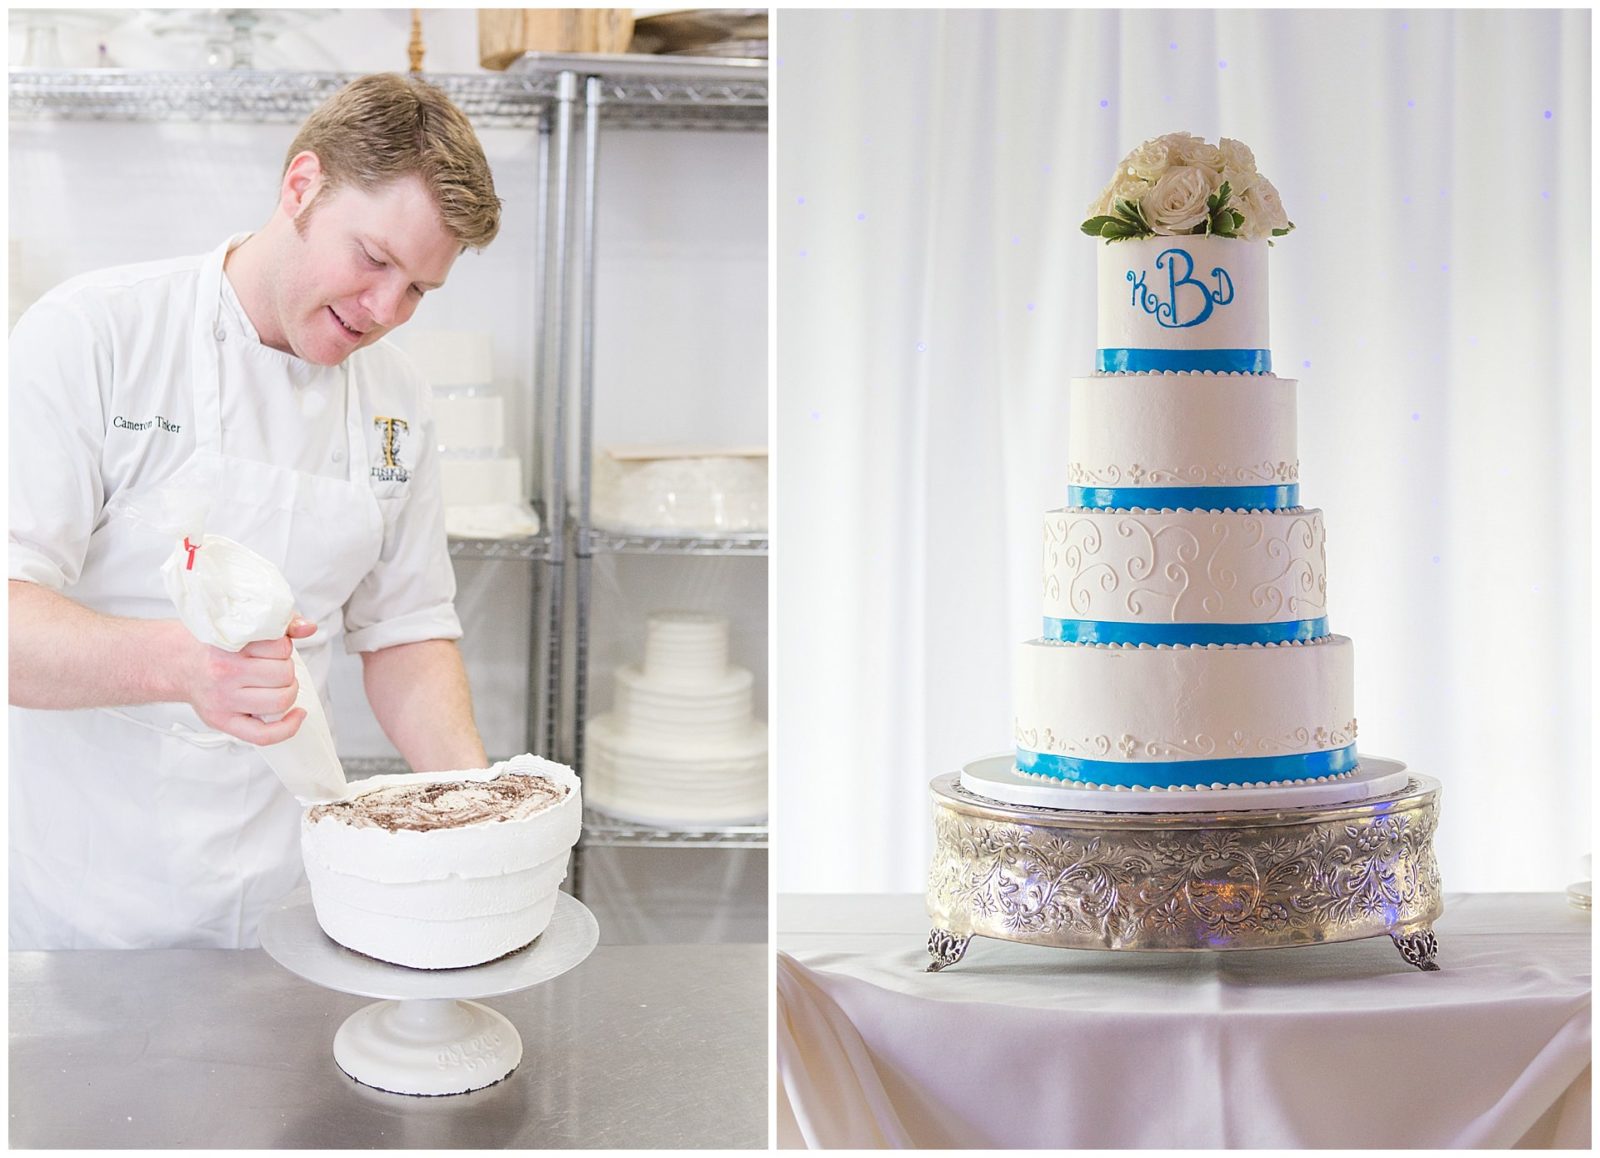 Wedding cake extraordinaire Cameron Tinker the owner of Tinker's Cake Shop based in Lexington, Kentucky. Award winning wedding cakes and groom's cakes. Photo by Kevin and Anna Photography www.kevinandannaweddings.com